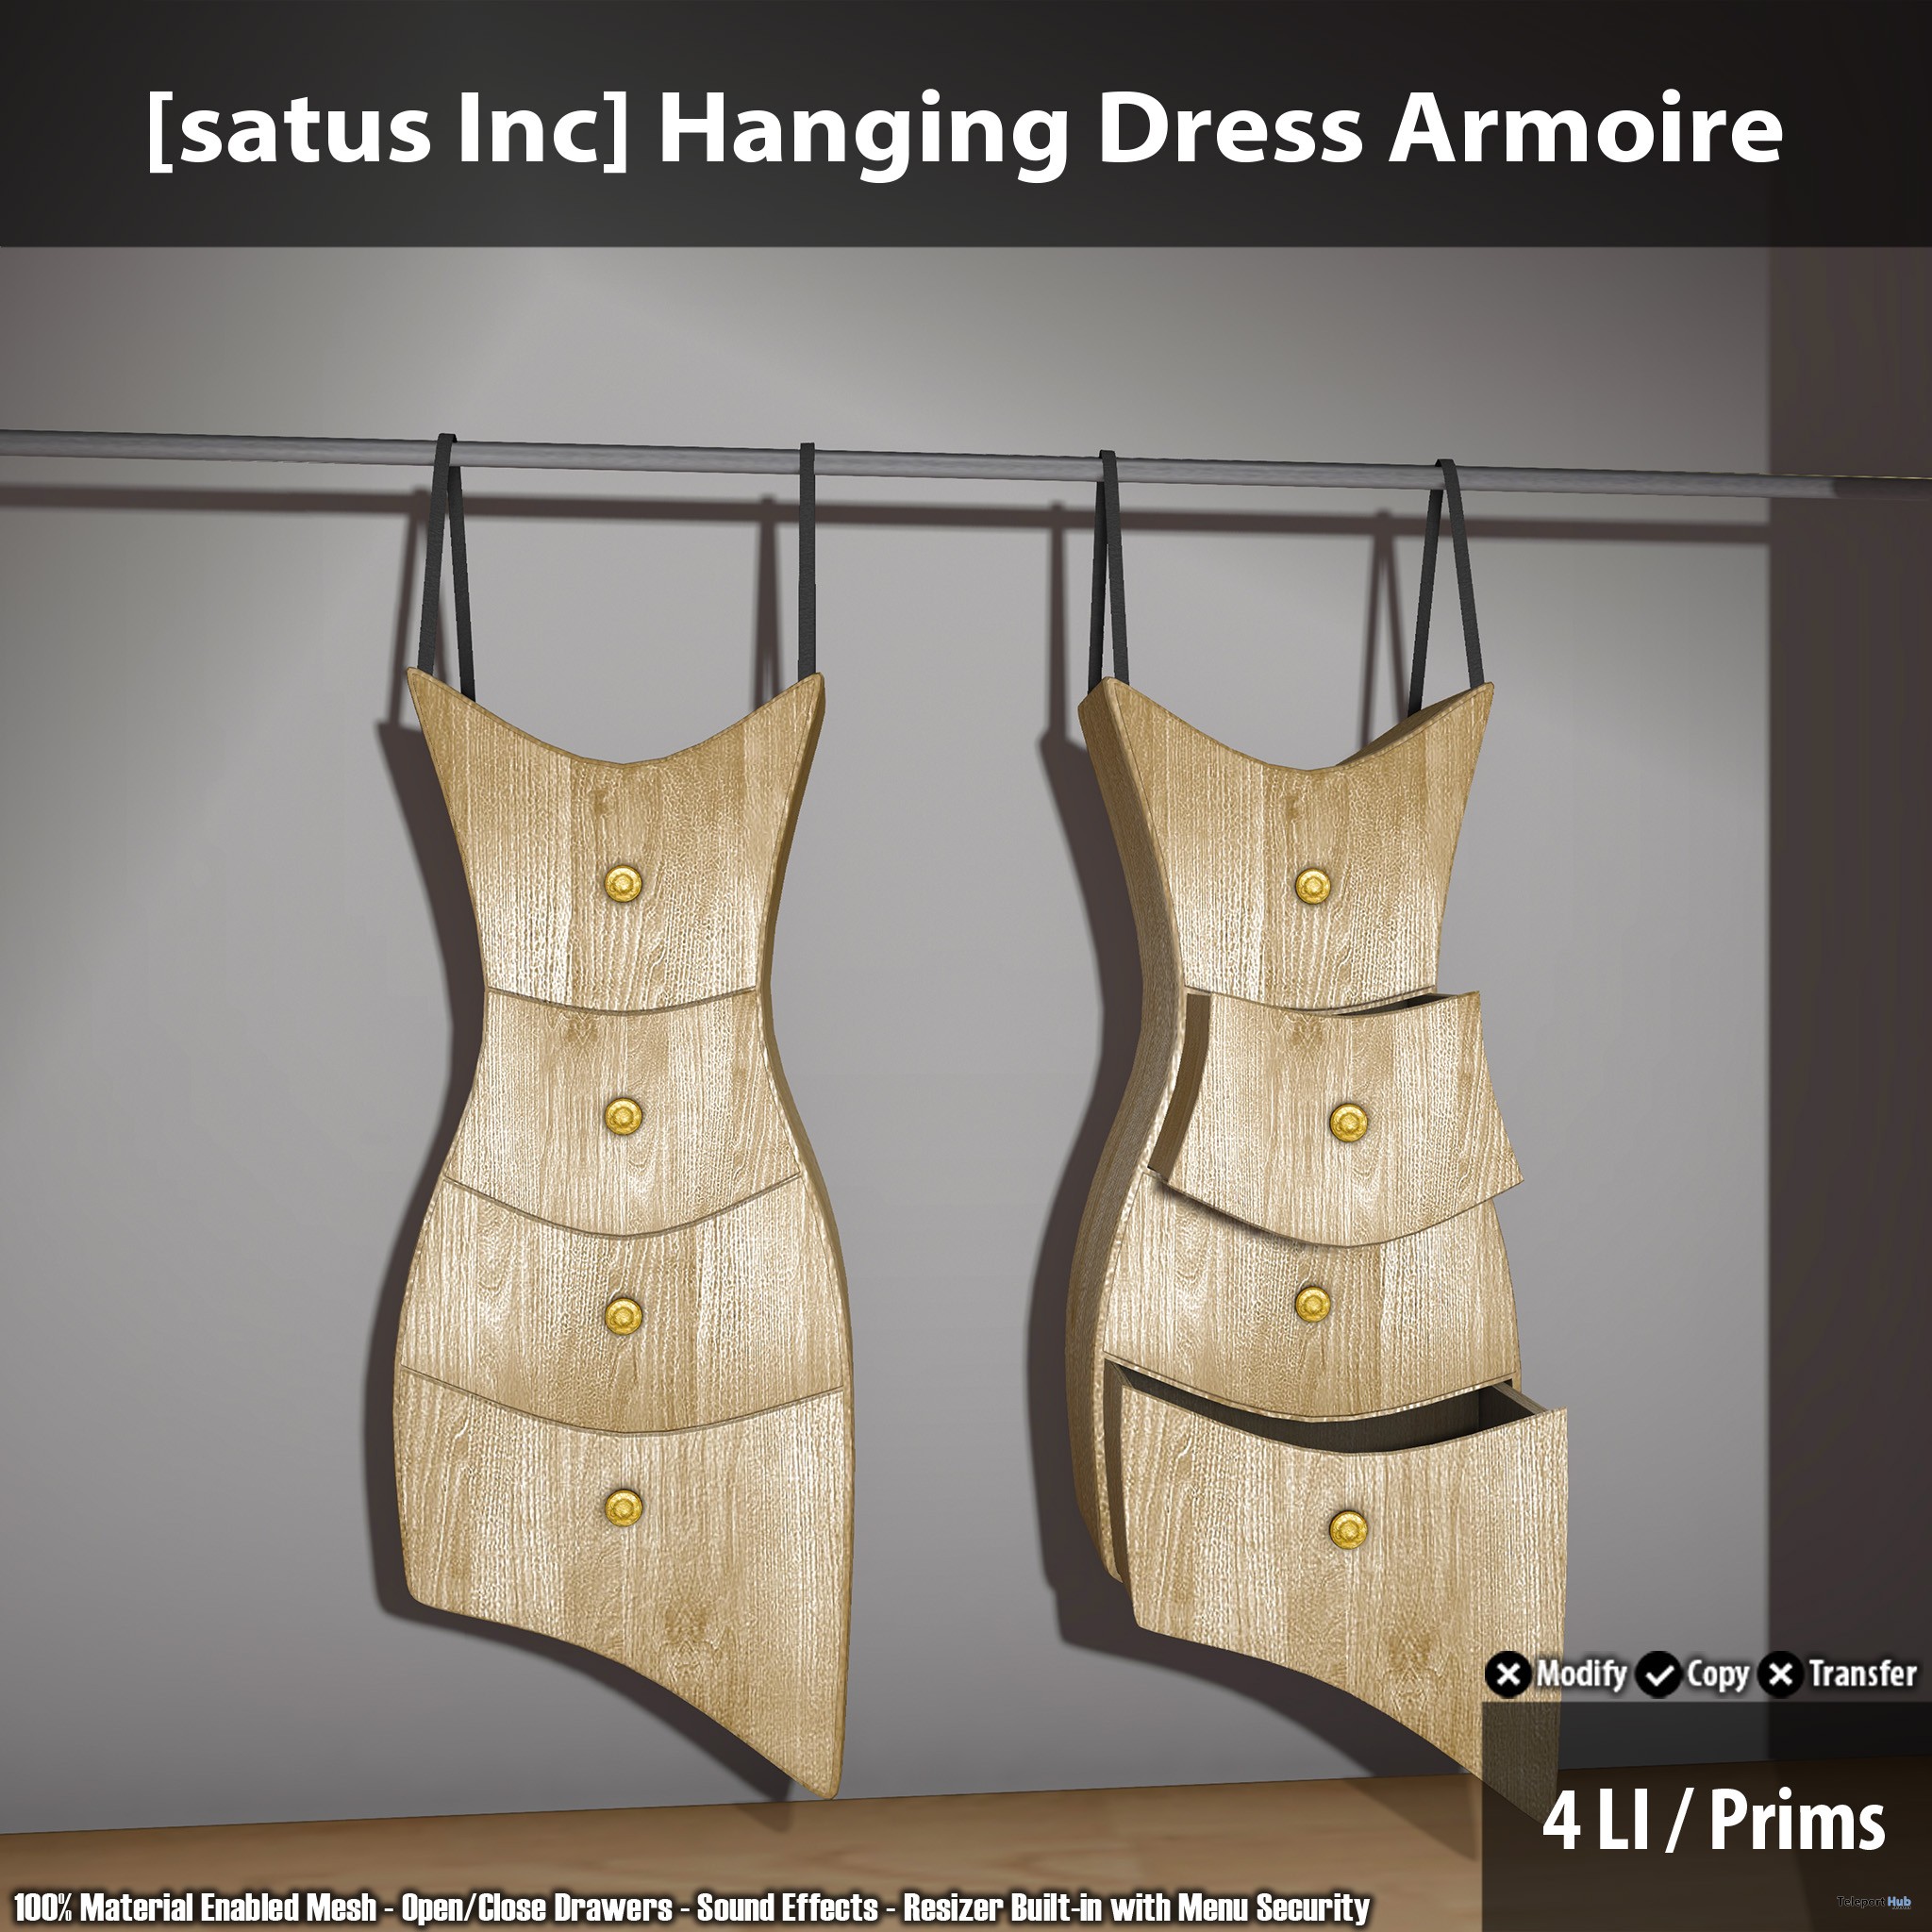 New Release: Hanging Dress Armoire by [satus Inc] - Teleport Hub - teleporthub.com